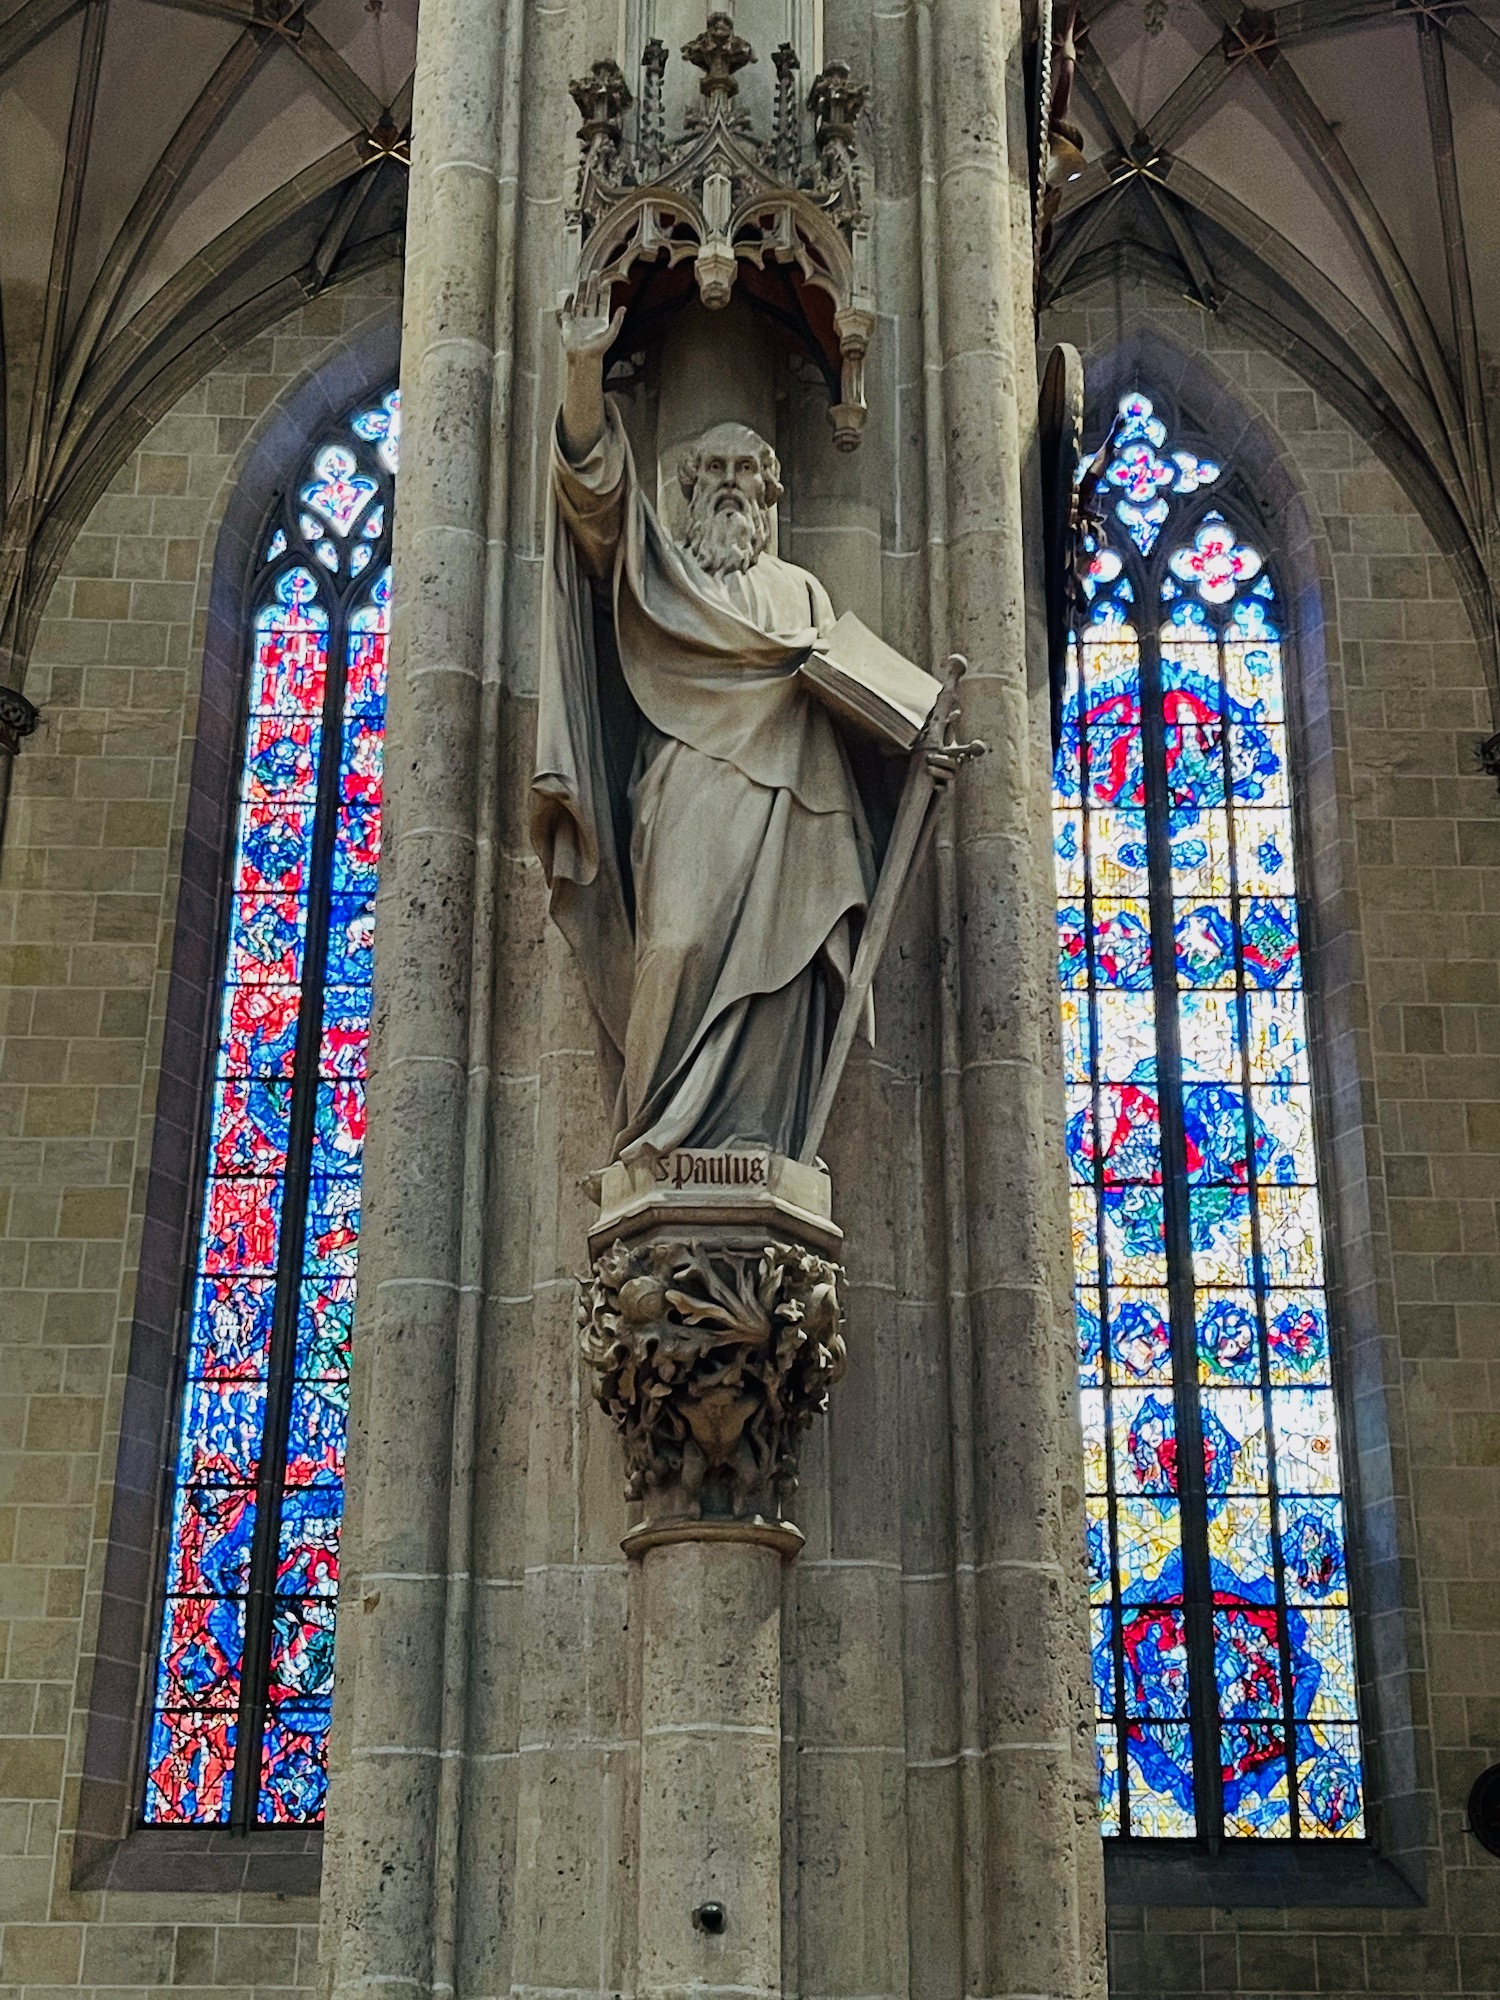 a statue of a man holding a book and a sword in a church